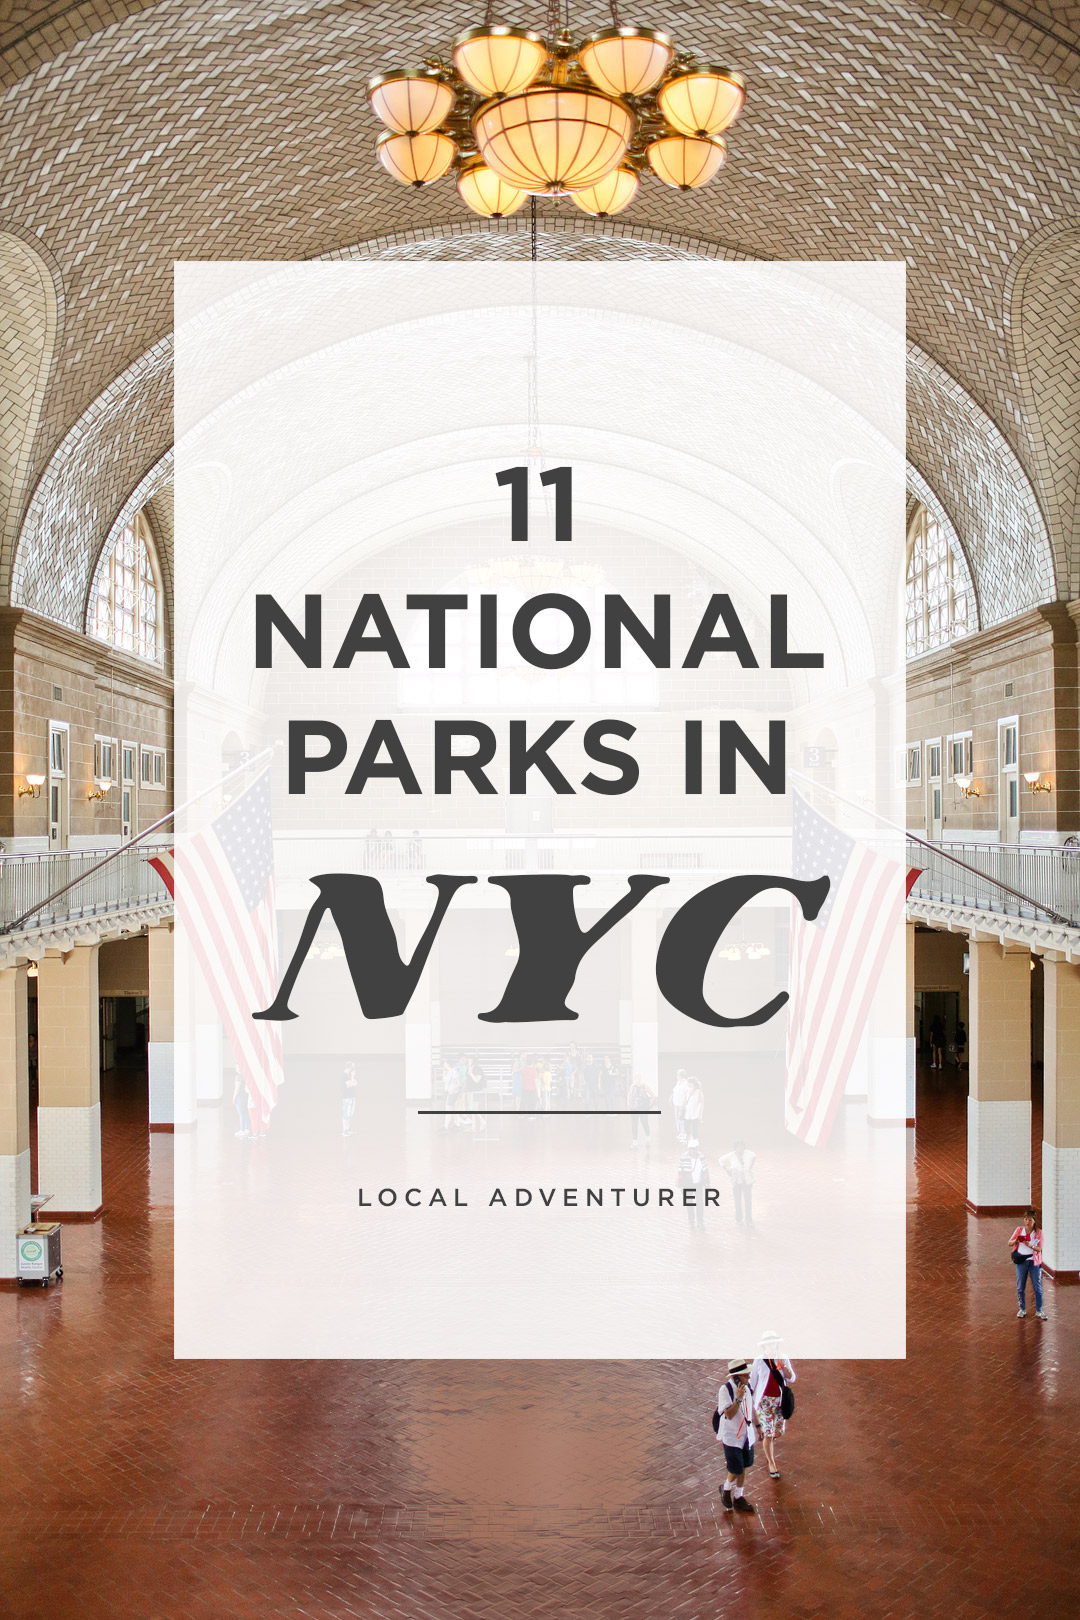 Looking for the best national parks in new york city? Save this pin and check out our complete guide and list of NYs parks. We cover all the tips you need to know for visiting the Statue of Library National Monument, Federal Hall, Stonewall Inn NYC, and more. If you want to get outside, we also include a list of the best New York state parks and a map to major national parks near the city (NYC to Acadia National Park here we come!) // Local Adventurer #seeyourcity #nycgo #nyc #iloveny #newyork #newyorkcity #visittheusa